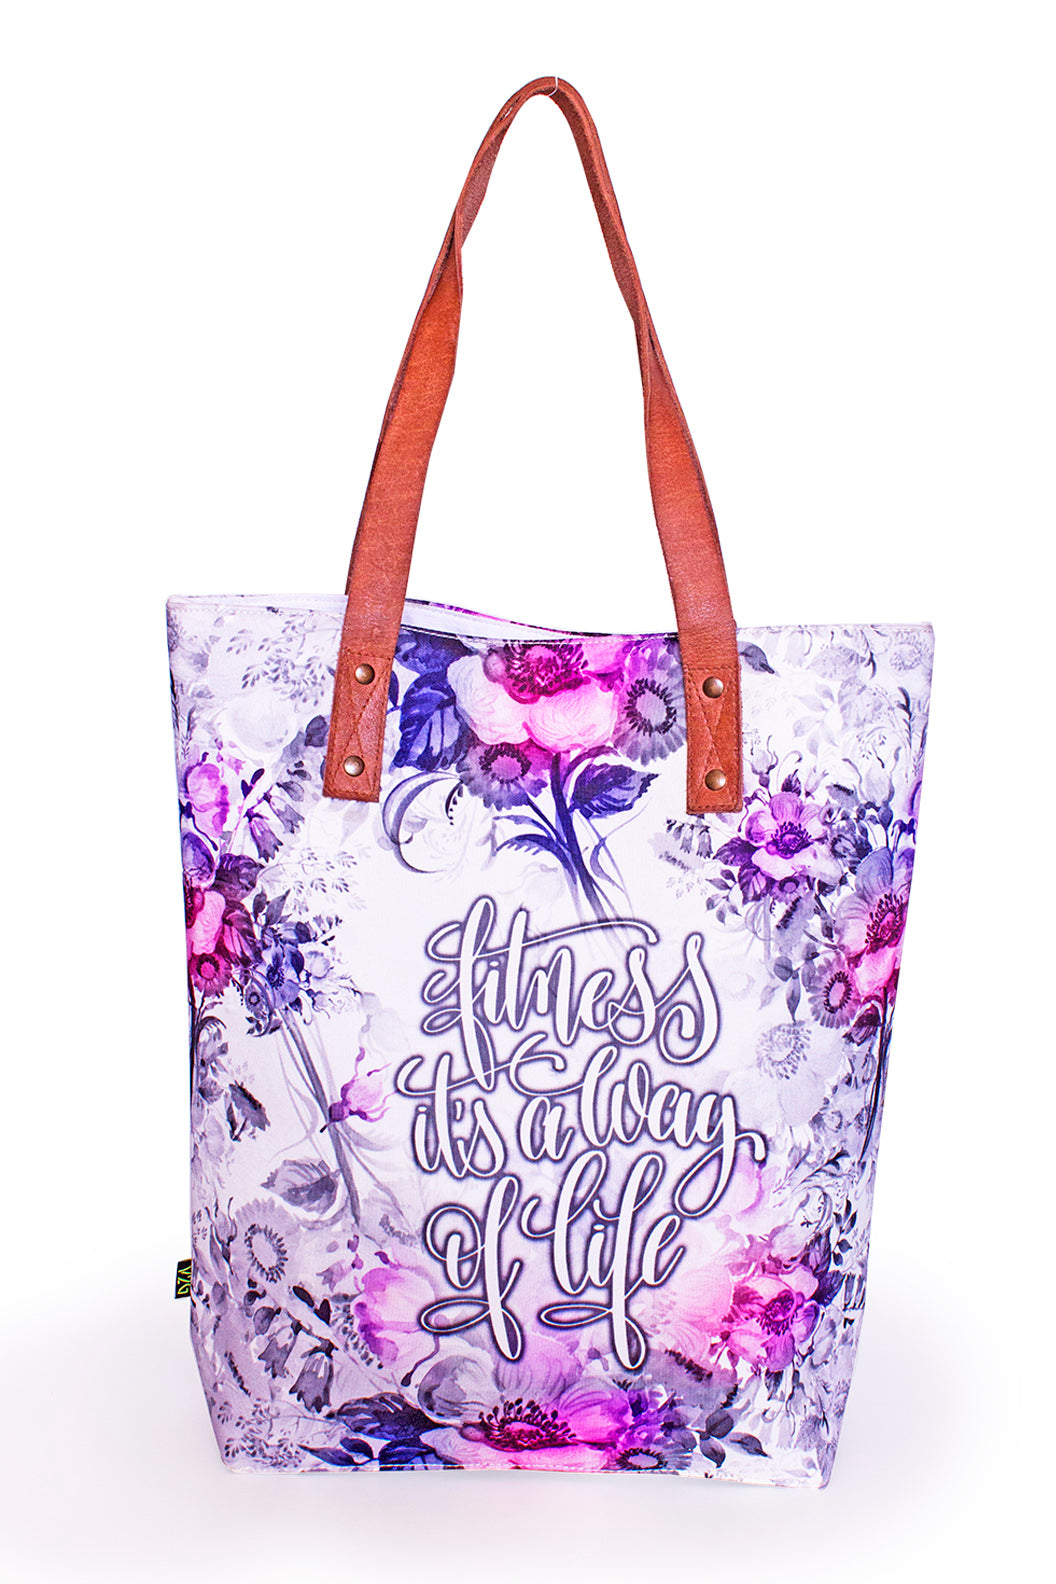 Tote Bag-fitness ,it’s a way of life